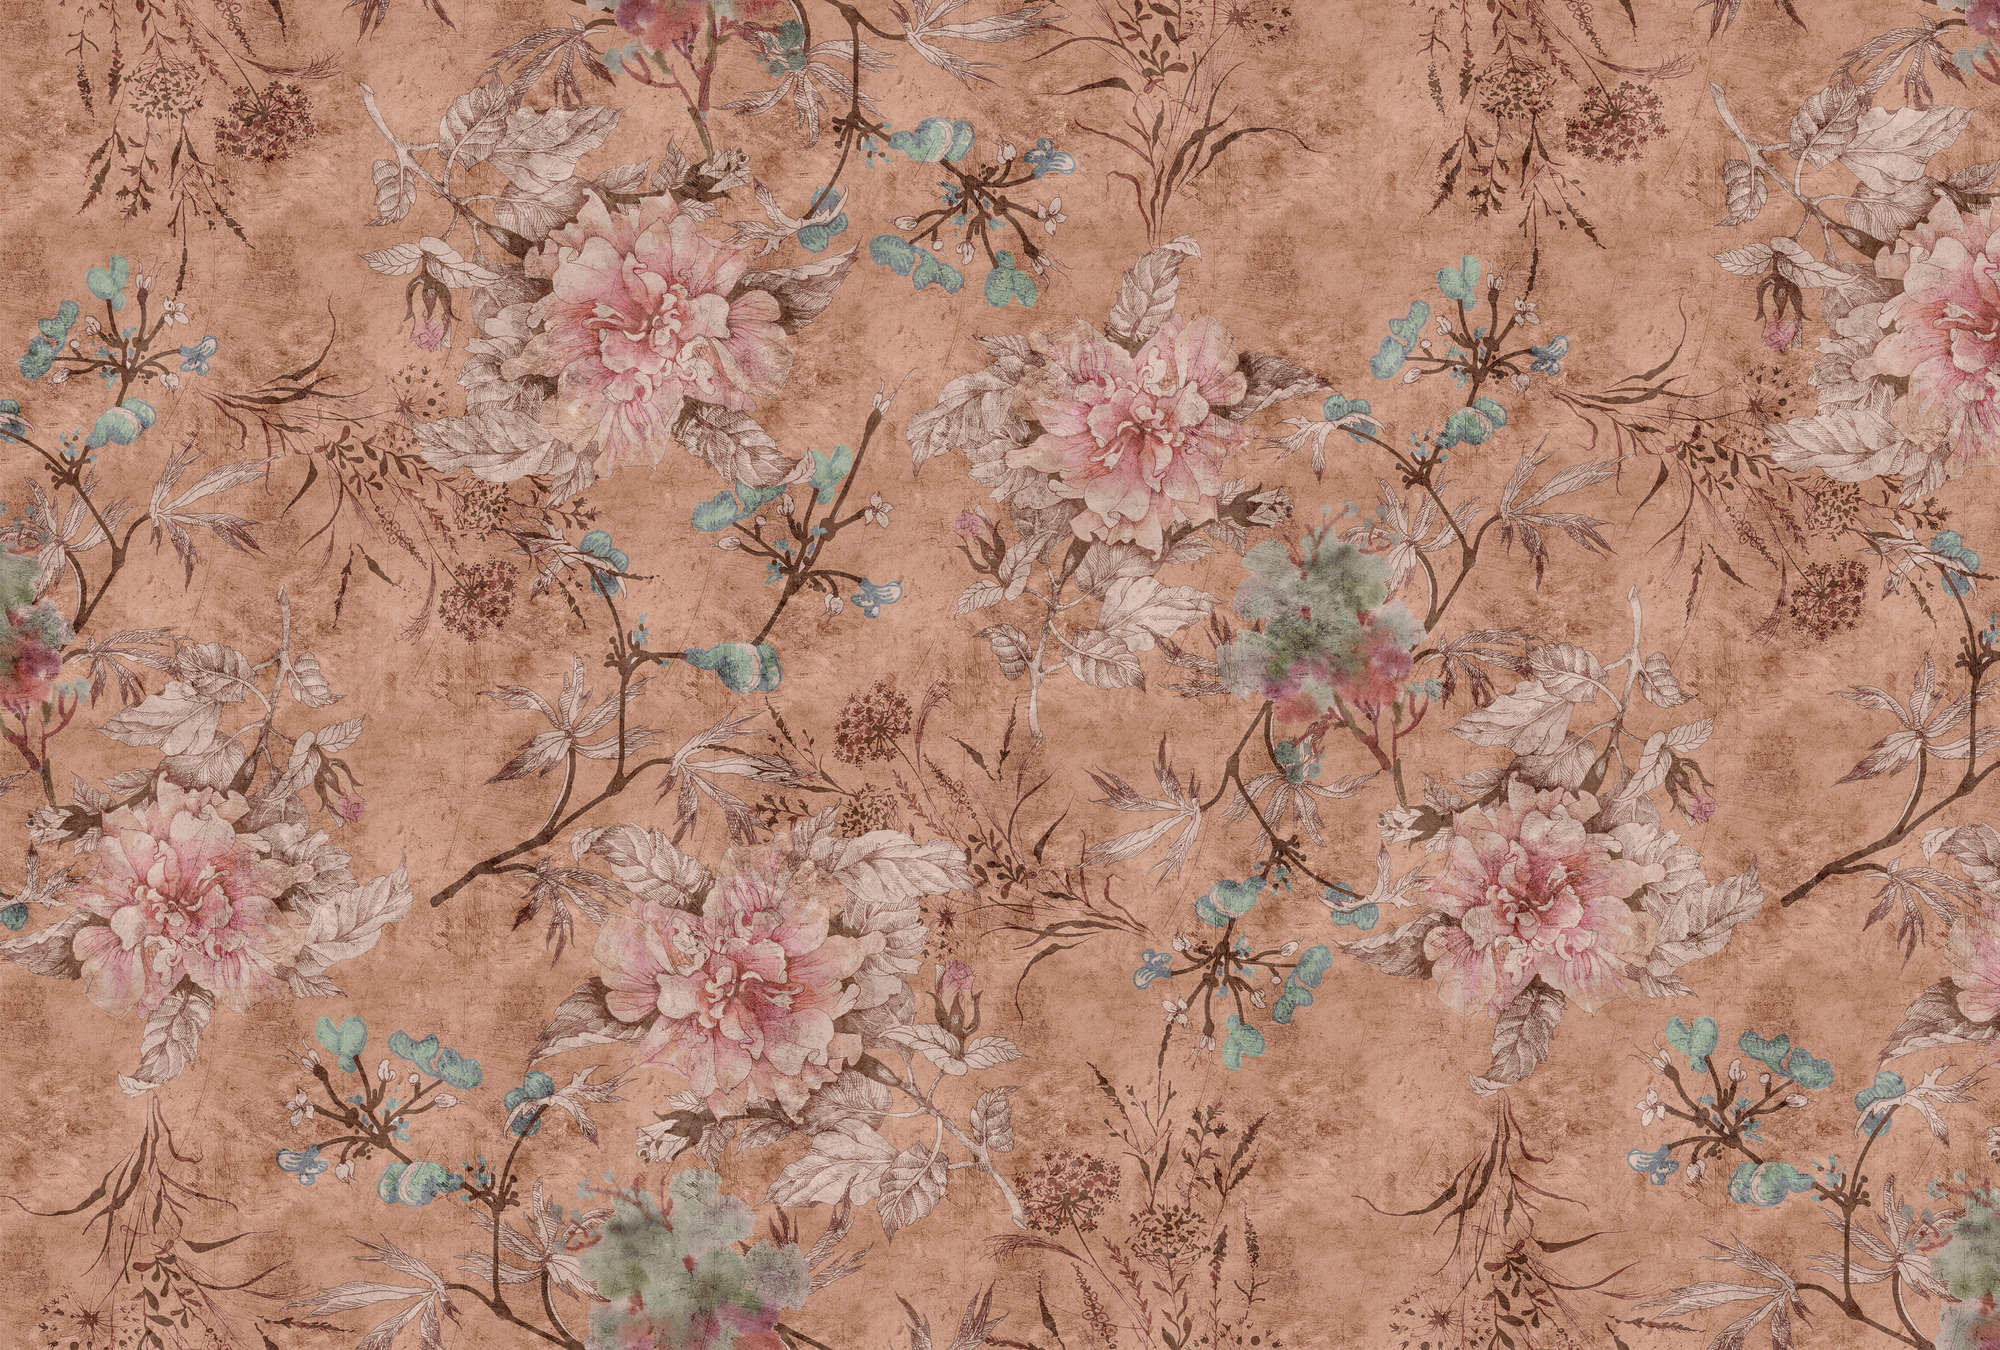             Tenderblossom 3 - Vintage style floral pattern digital print wallpaper - Pink, Red | Pearl smooth non-woven
        